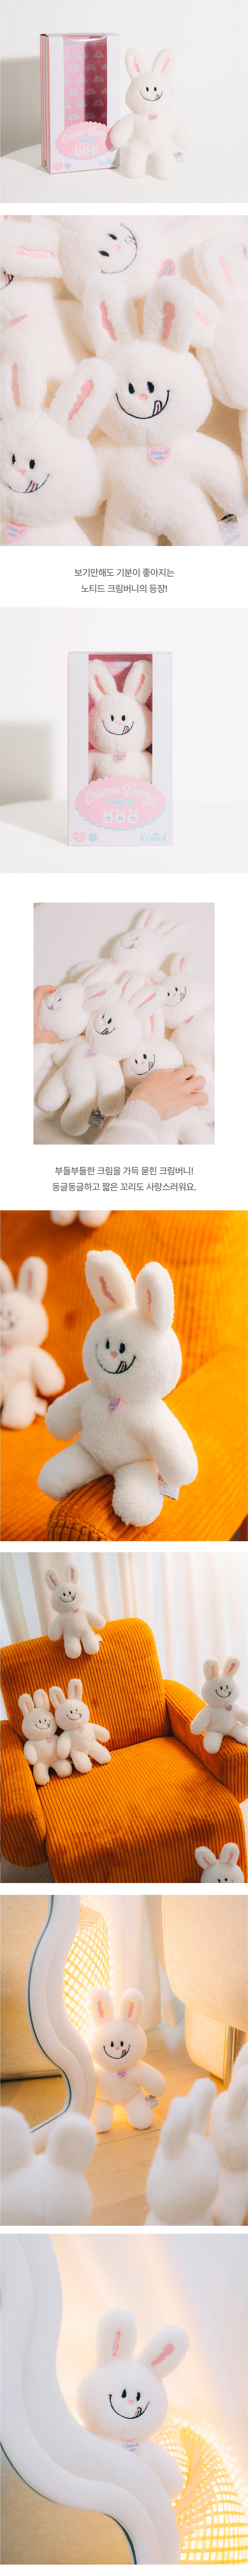 KNOTTED - CREAM BUNNY DOLL